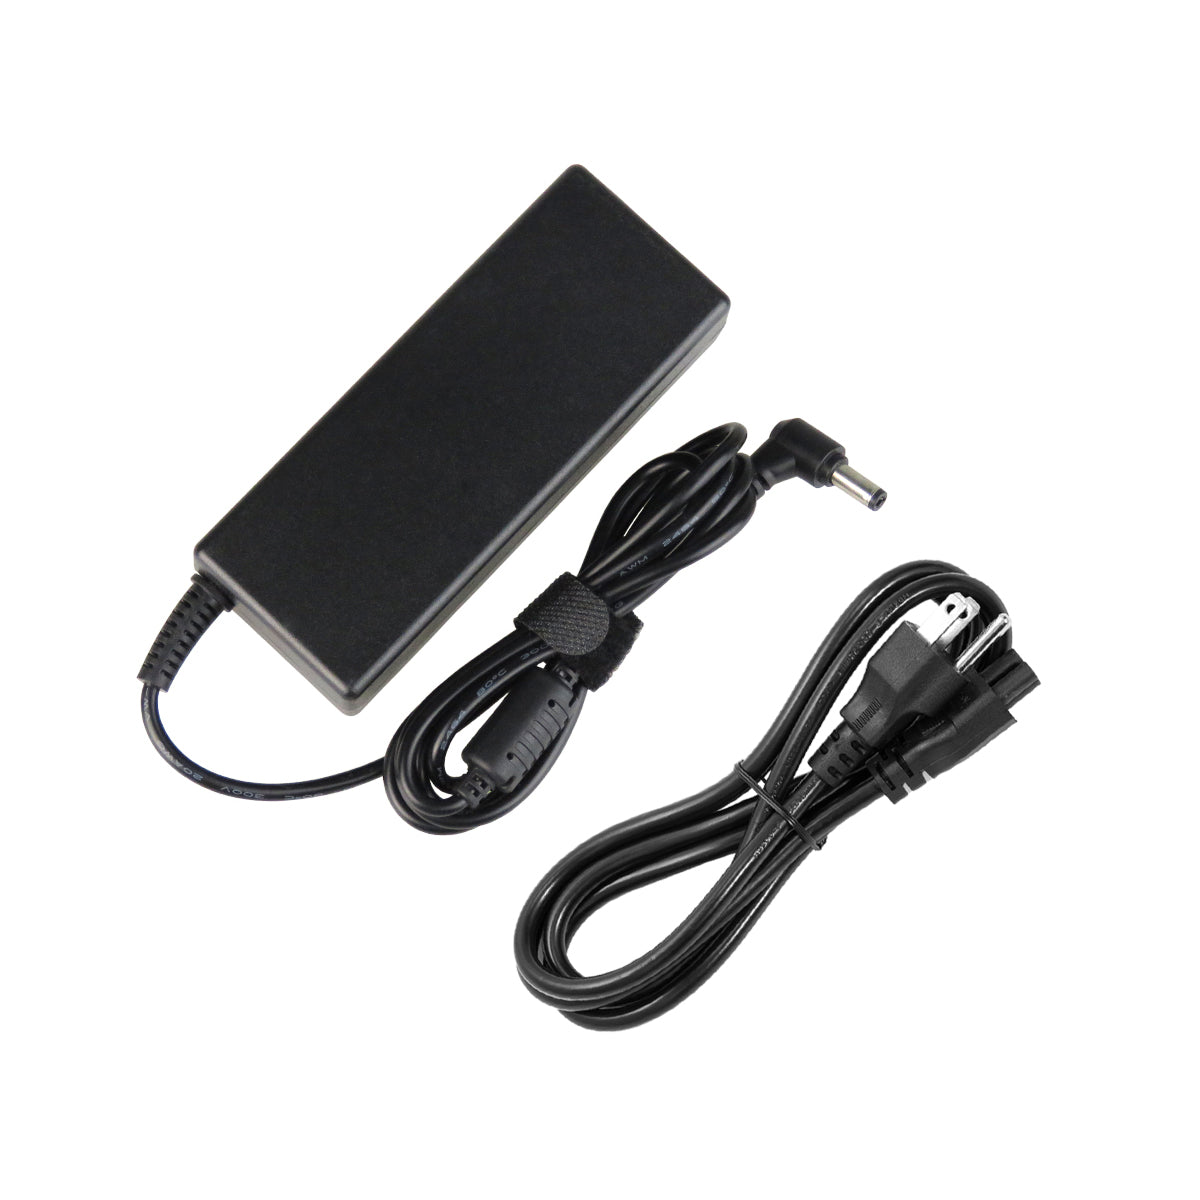 Charger for Toshiba Satellite A135-S4527 Notebook.